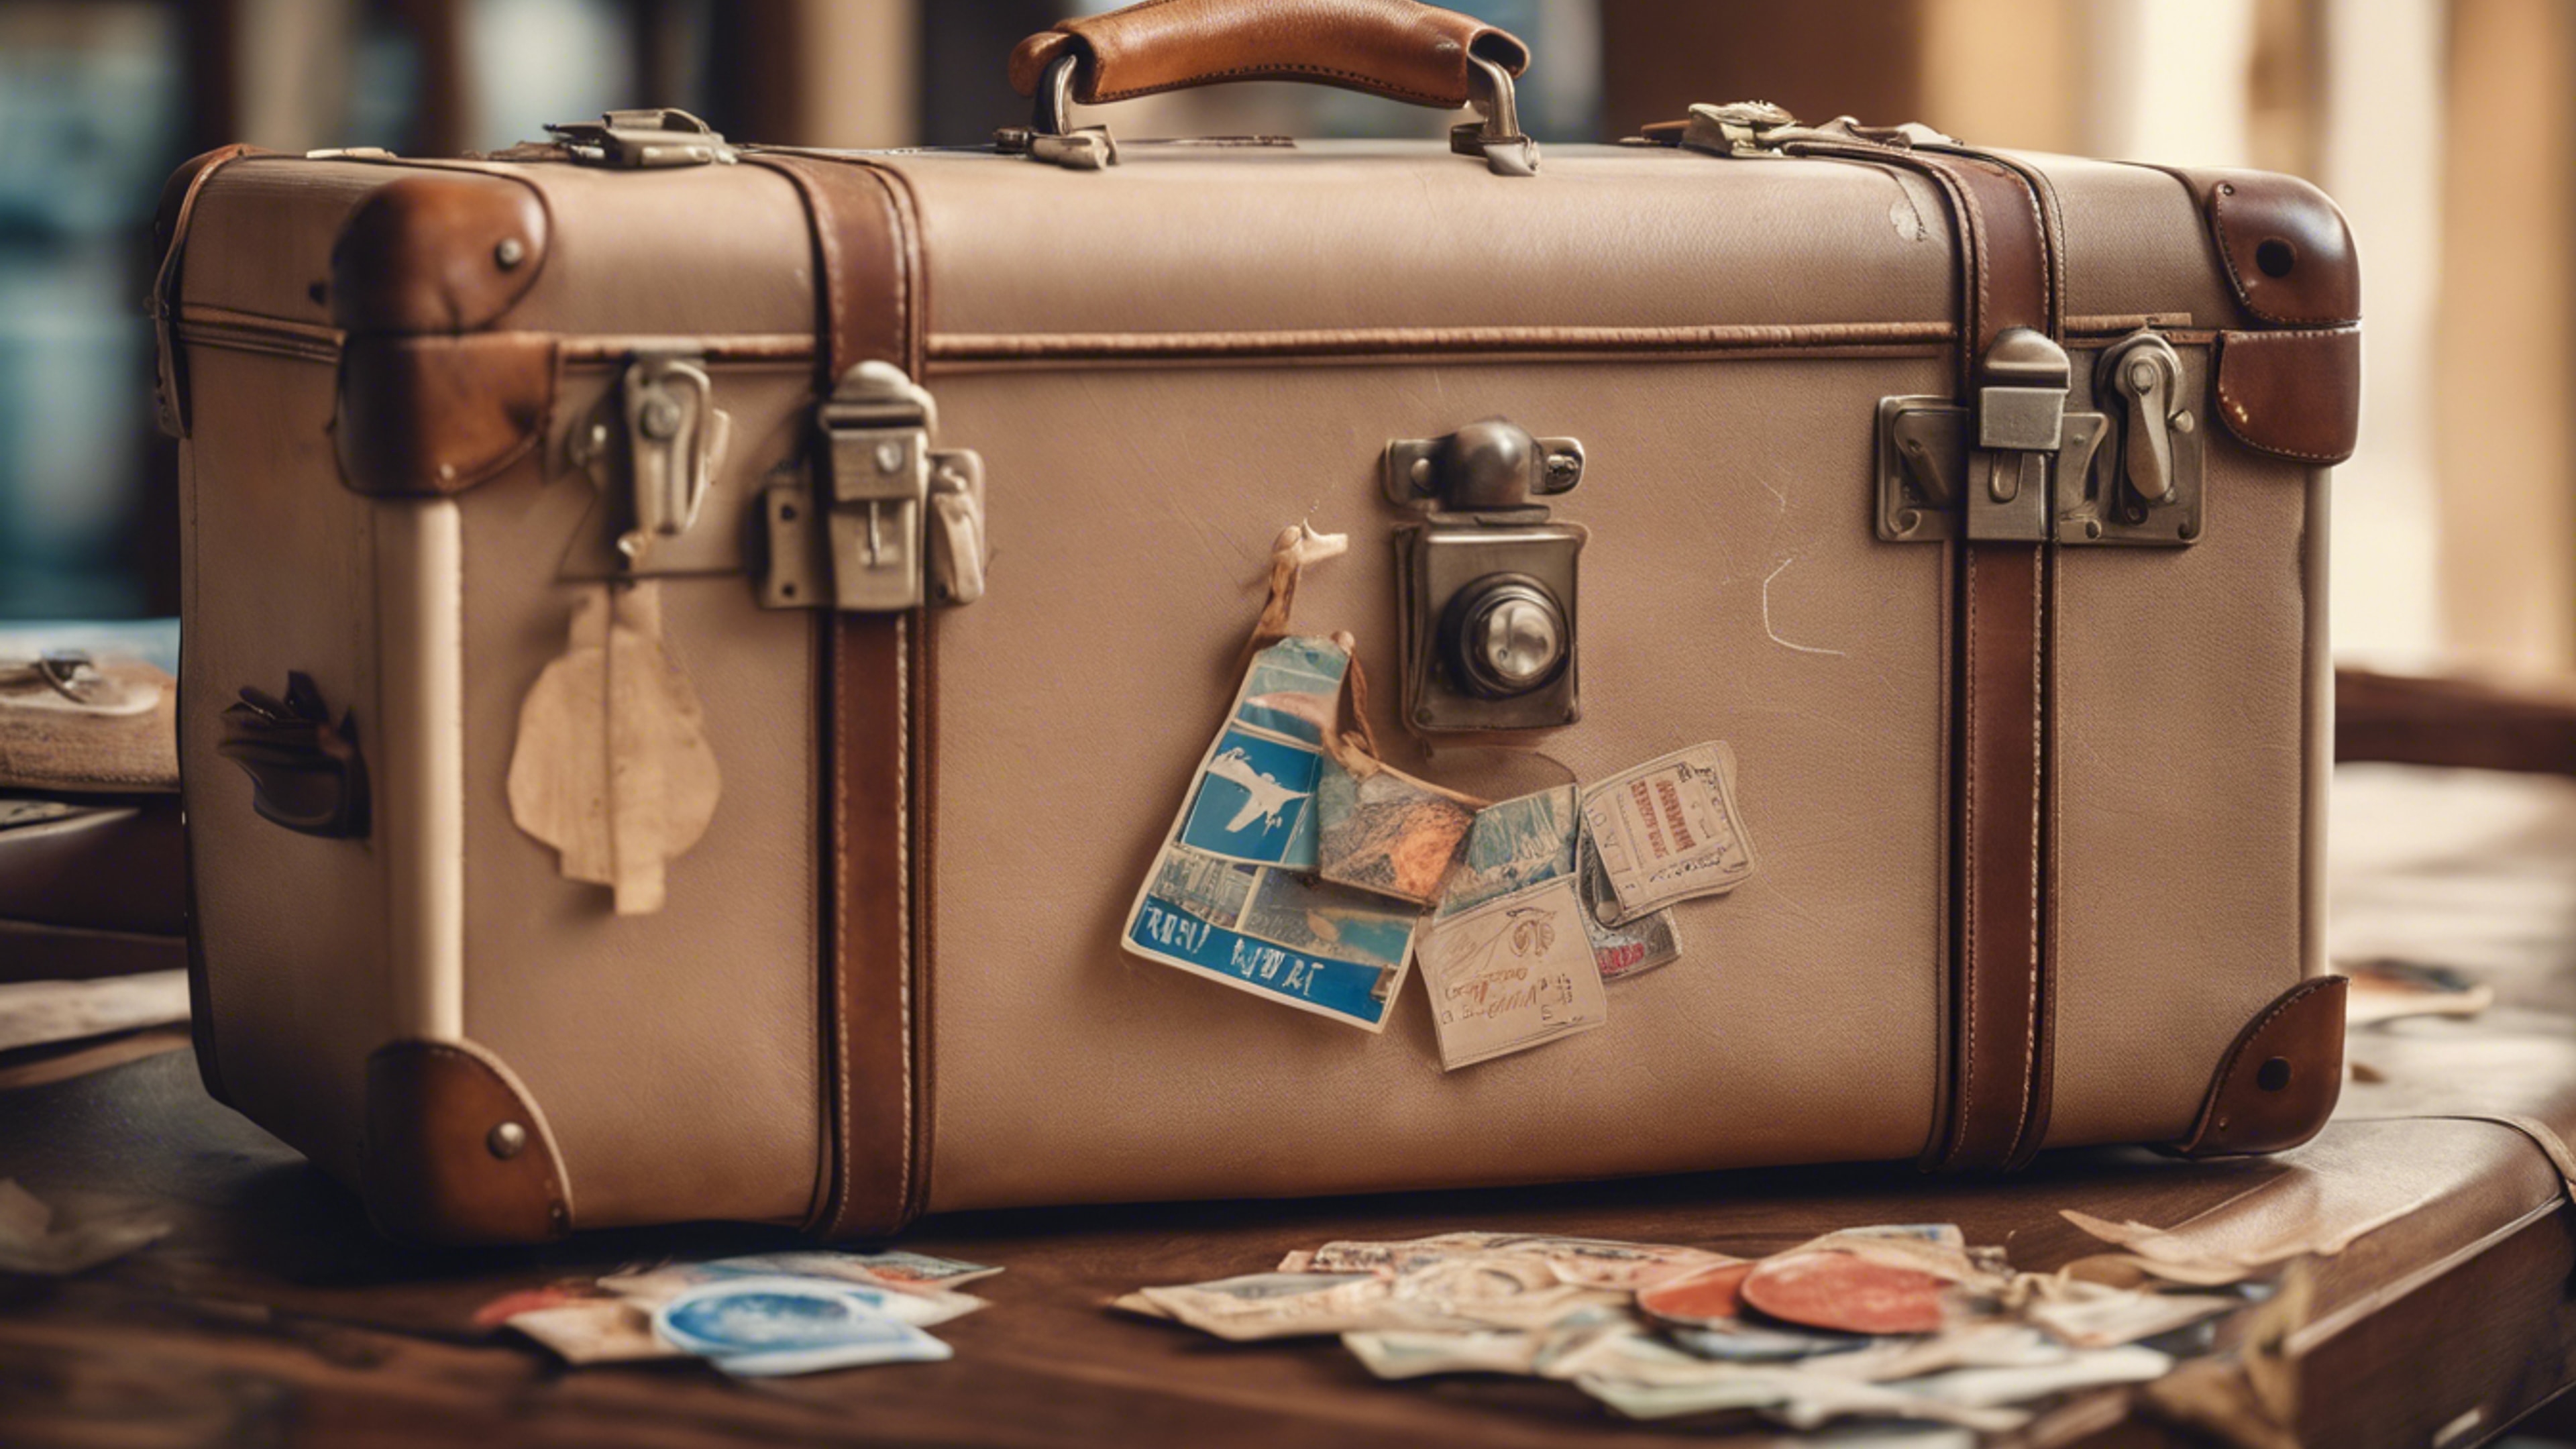 A Beige vintage leather suitcase with travel stickers. Ფონი[538daa9f754345eba040]